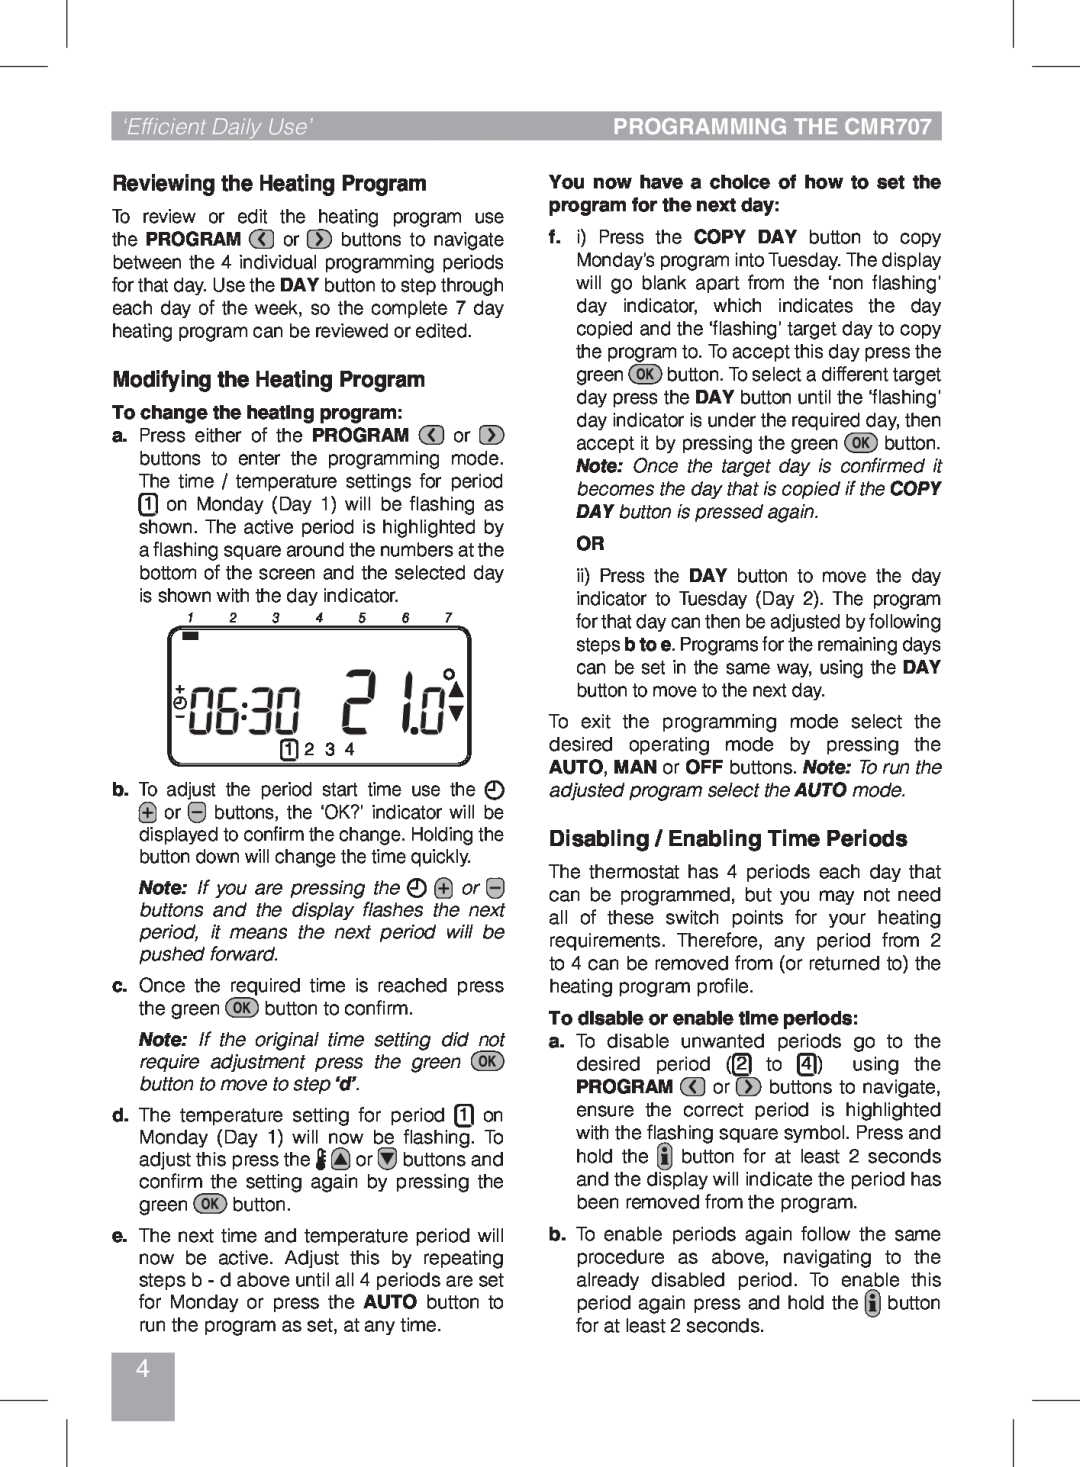 Honeywell CMR707A1049 manual ‘Efficient Daily Use’, Reviewing the Heating Program, Modifying the Heating Program 